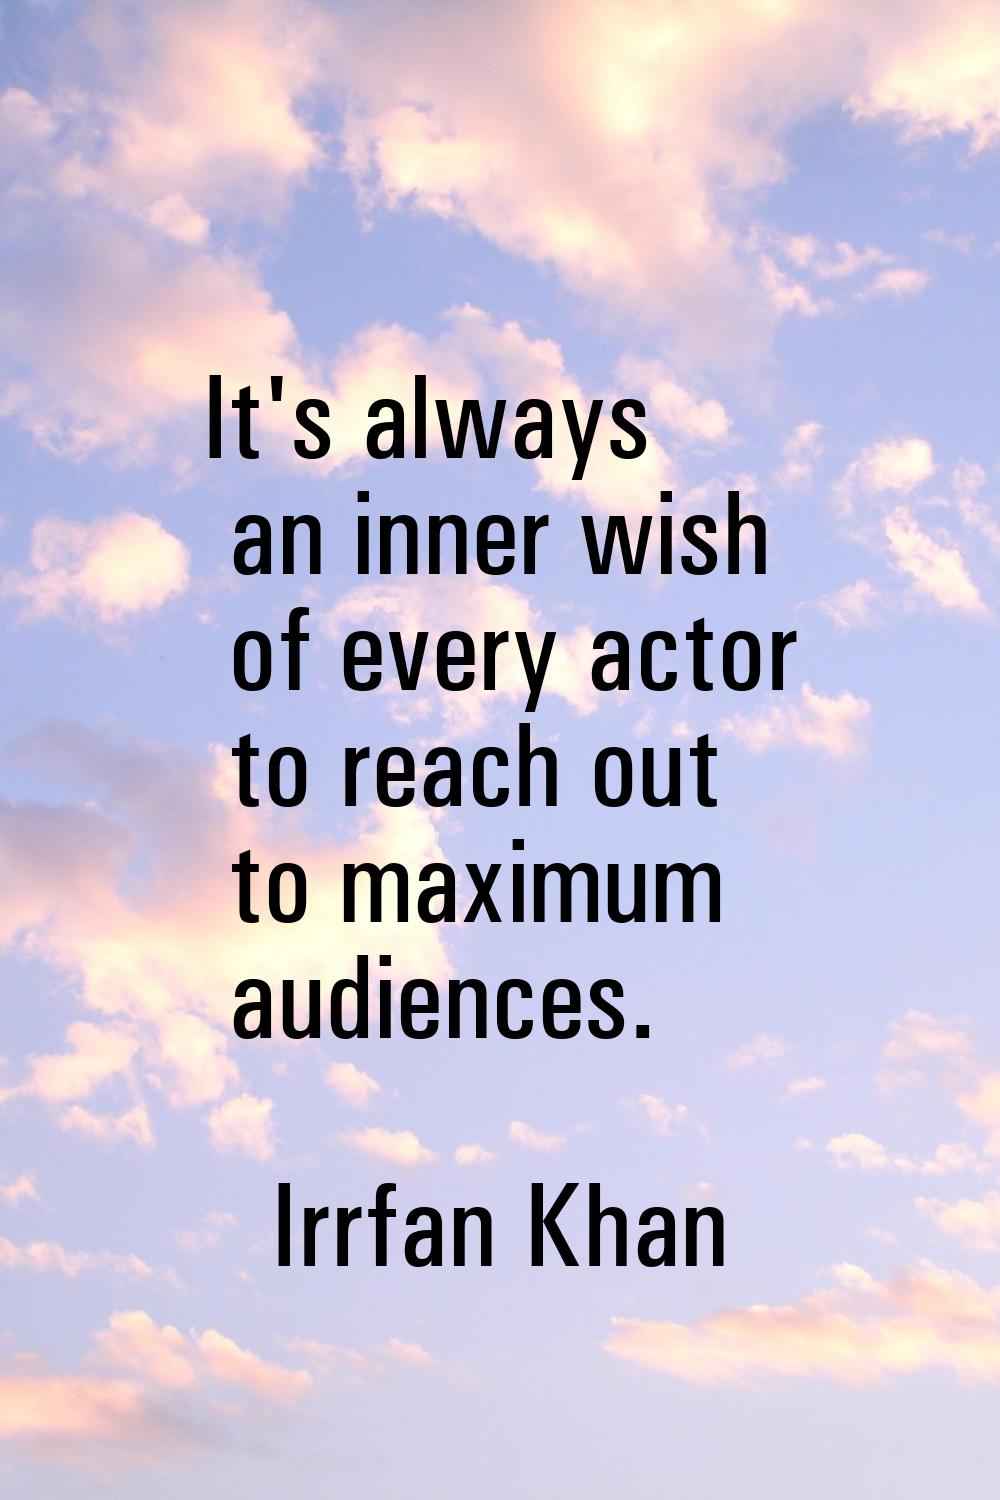 It's always an inner wish of every actor to reach out to maximum audiences.